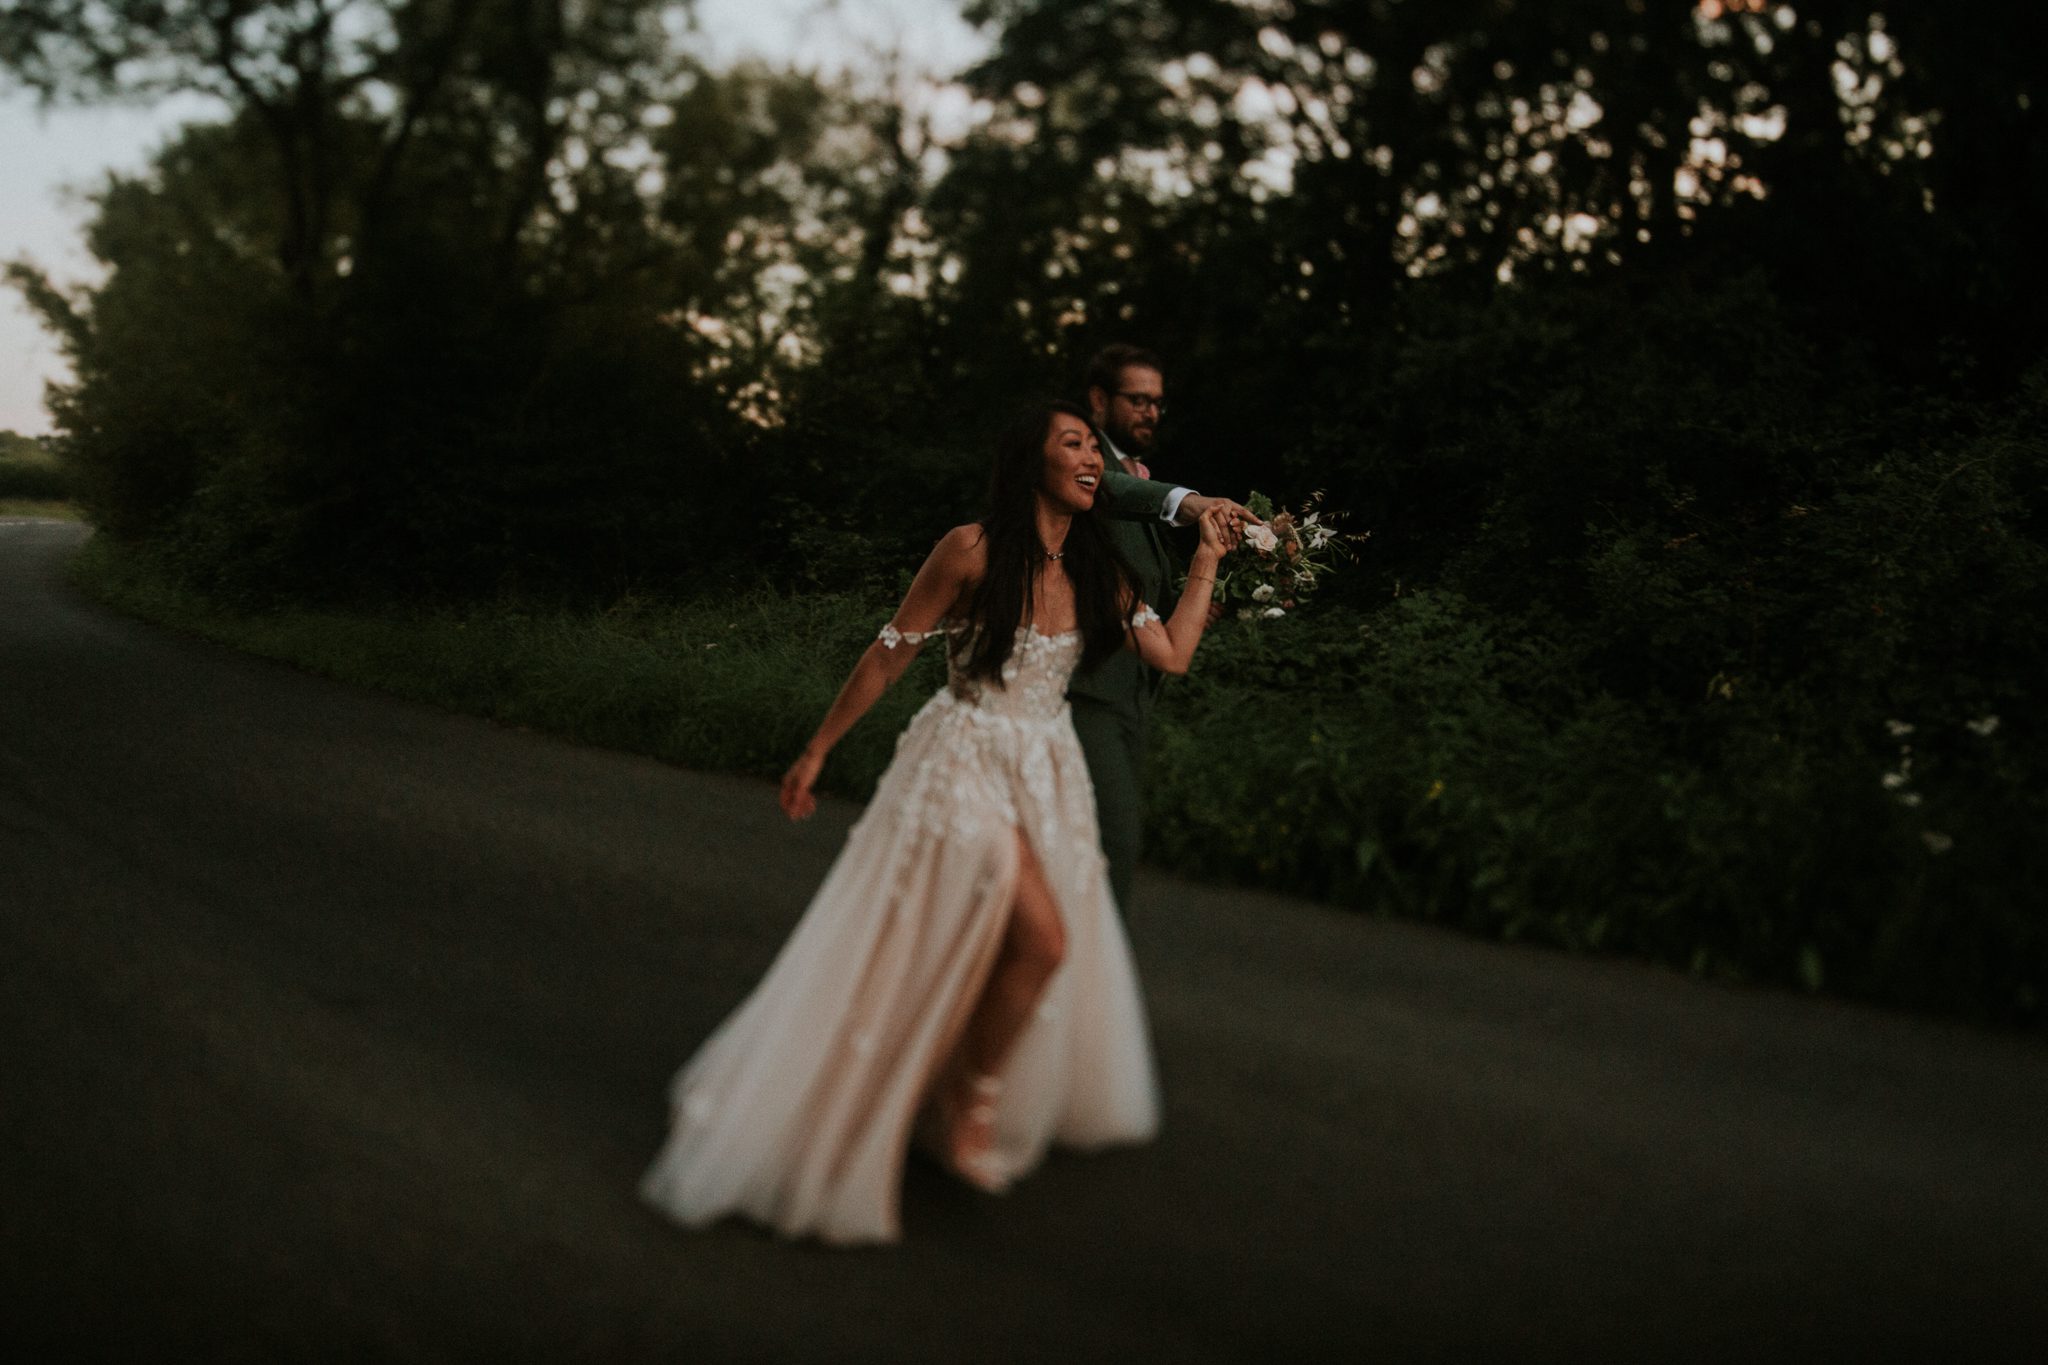 The bride and groom run down a road laughing after their wedding at Upthorne Wood in Suffolk